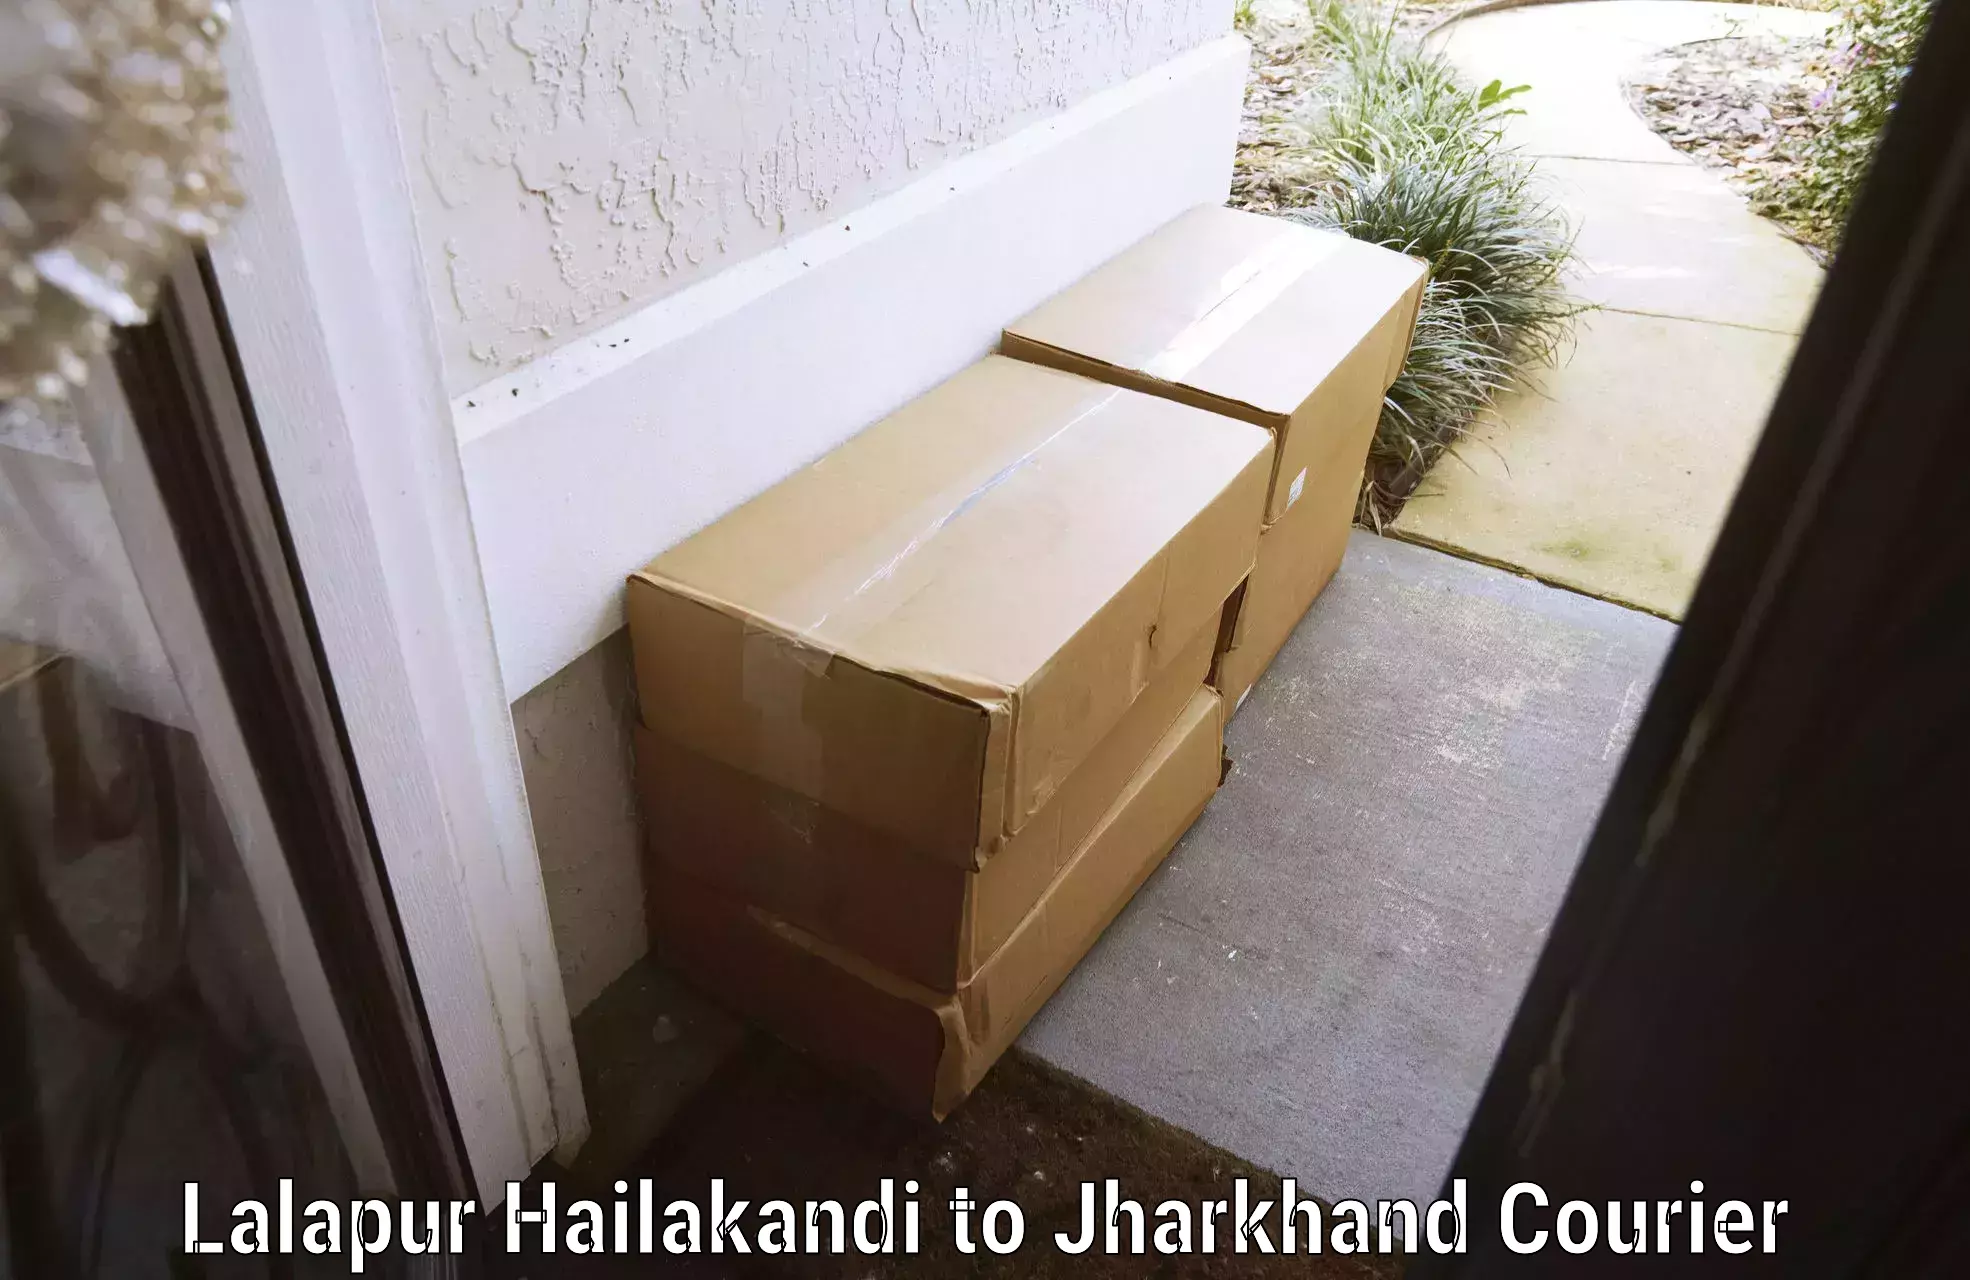 Baggage delivery support Lalapur Hailakandi to Tisri